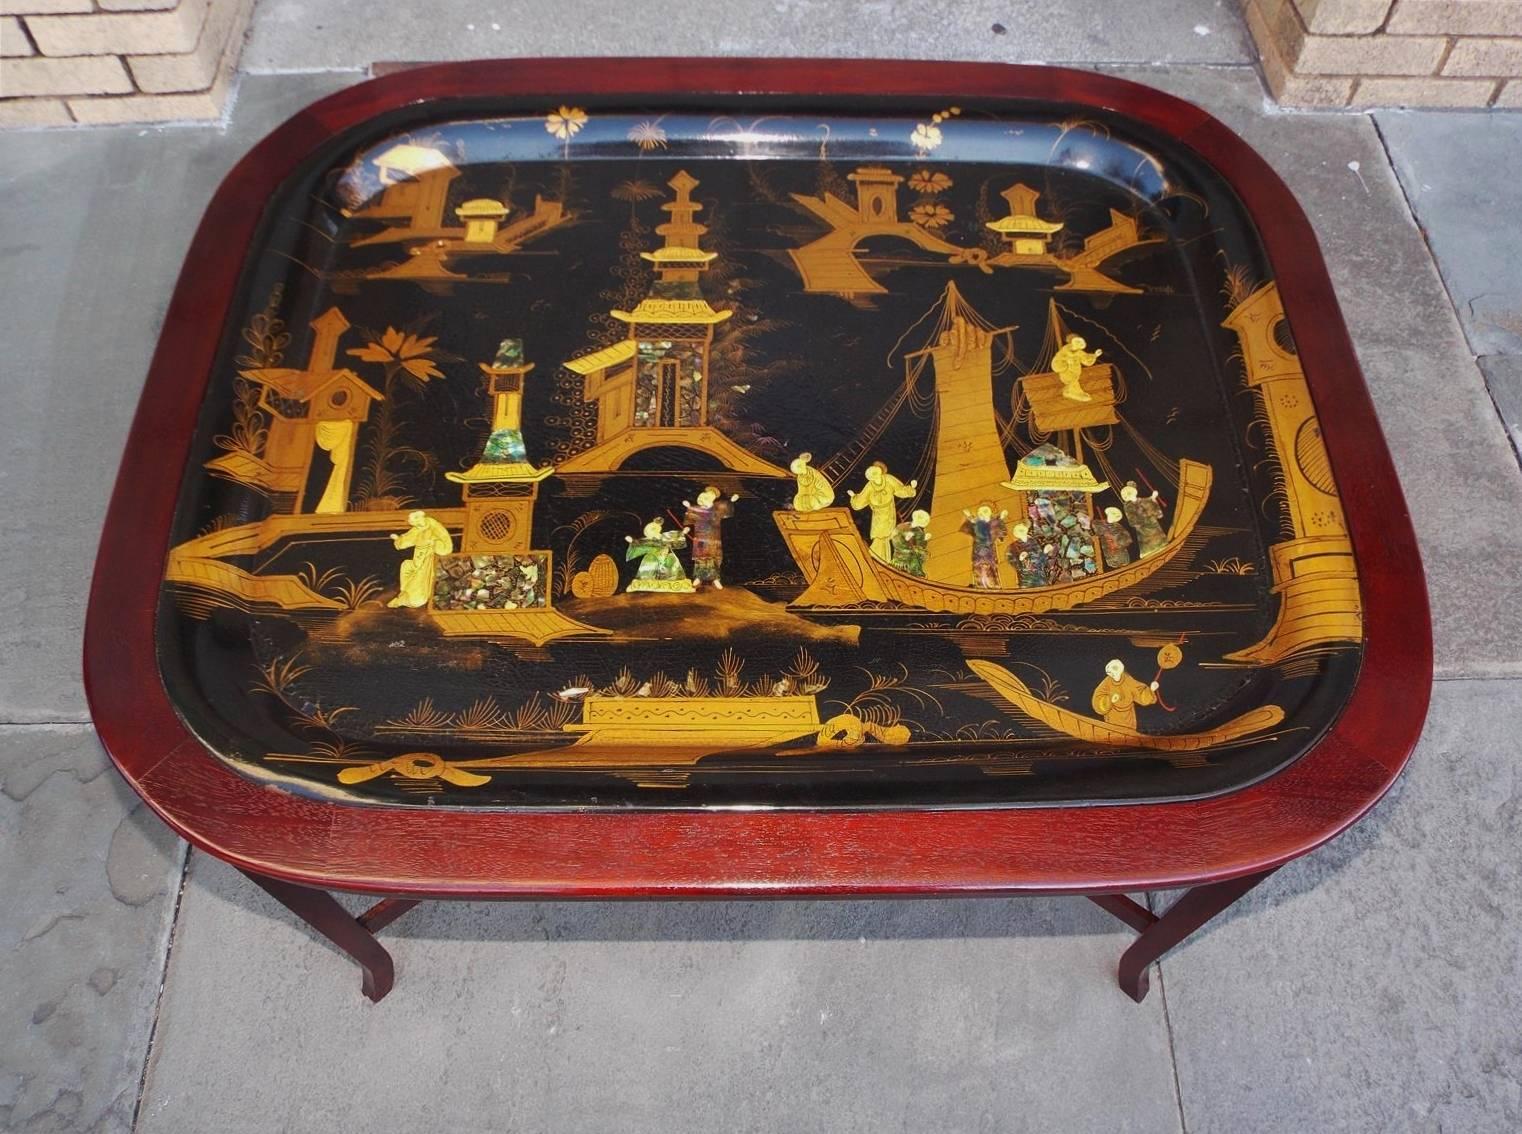 English Chinoiserie gilt paper mâché tray on stand with decorative abalone carvings, sailing ships, pagodas, landscape scenes, and resting on a mahogany stand with splayed feet and connecting stretchers, Early 19th century.